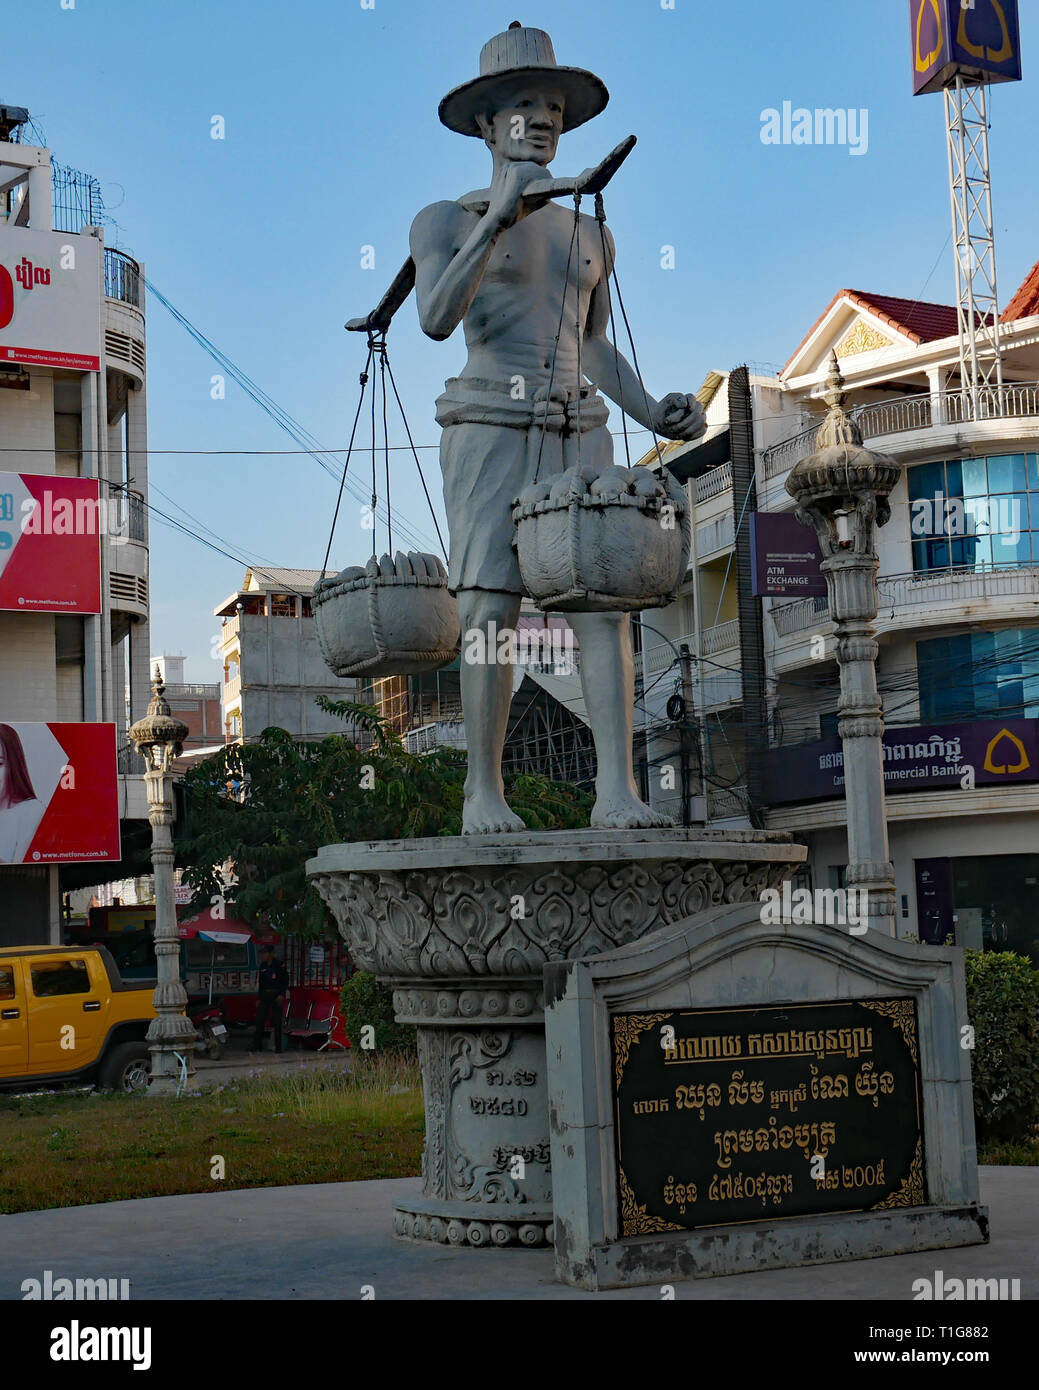 The Peddler Statue is of a man with a yoke across his shoulders, carrying baskets of fruit for sale representing commerce in Battambang city. Stock Photo